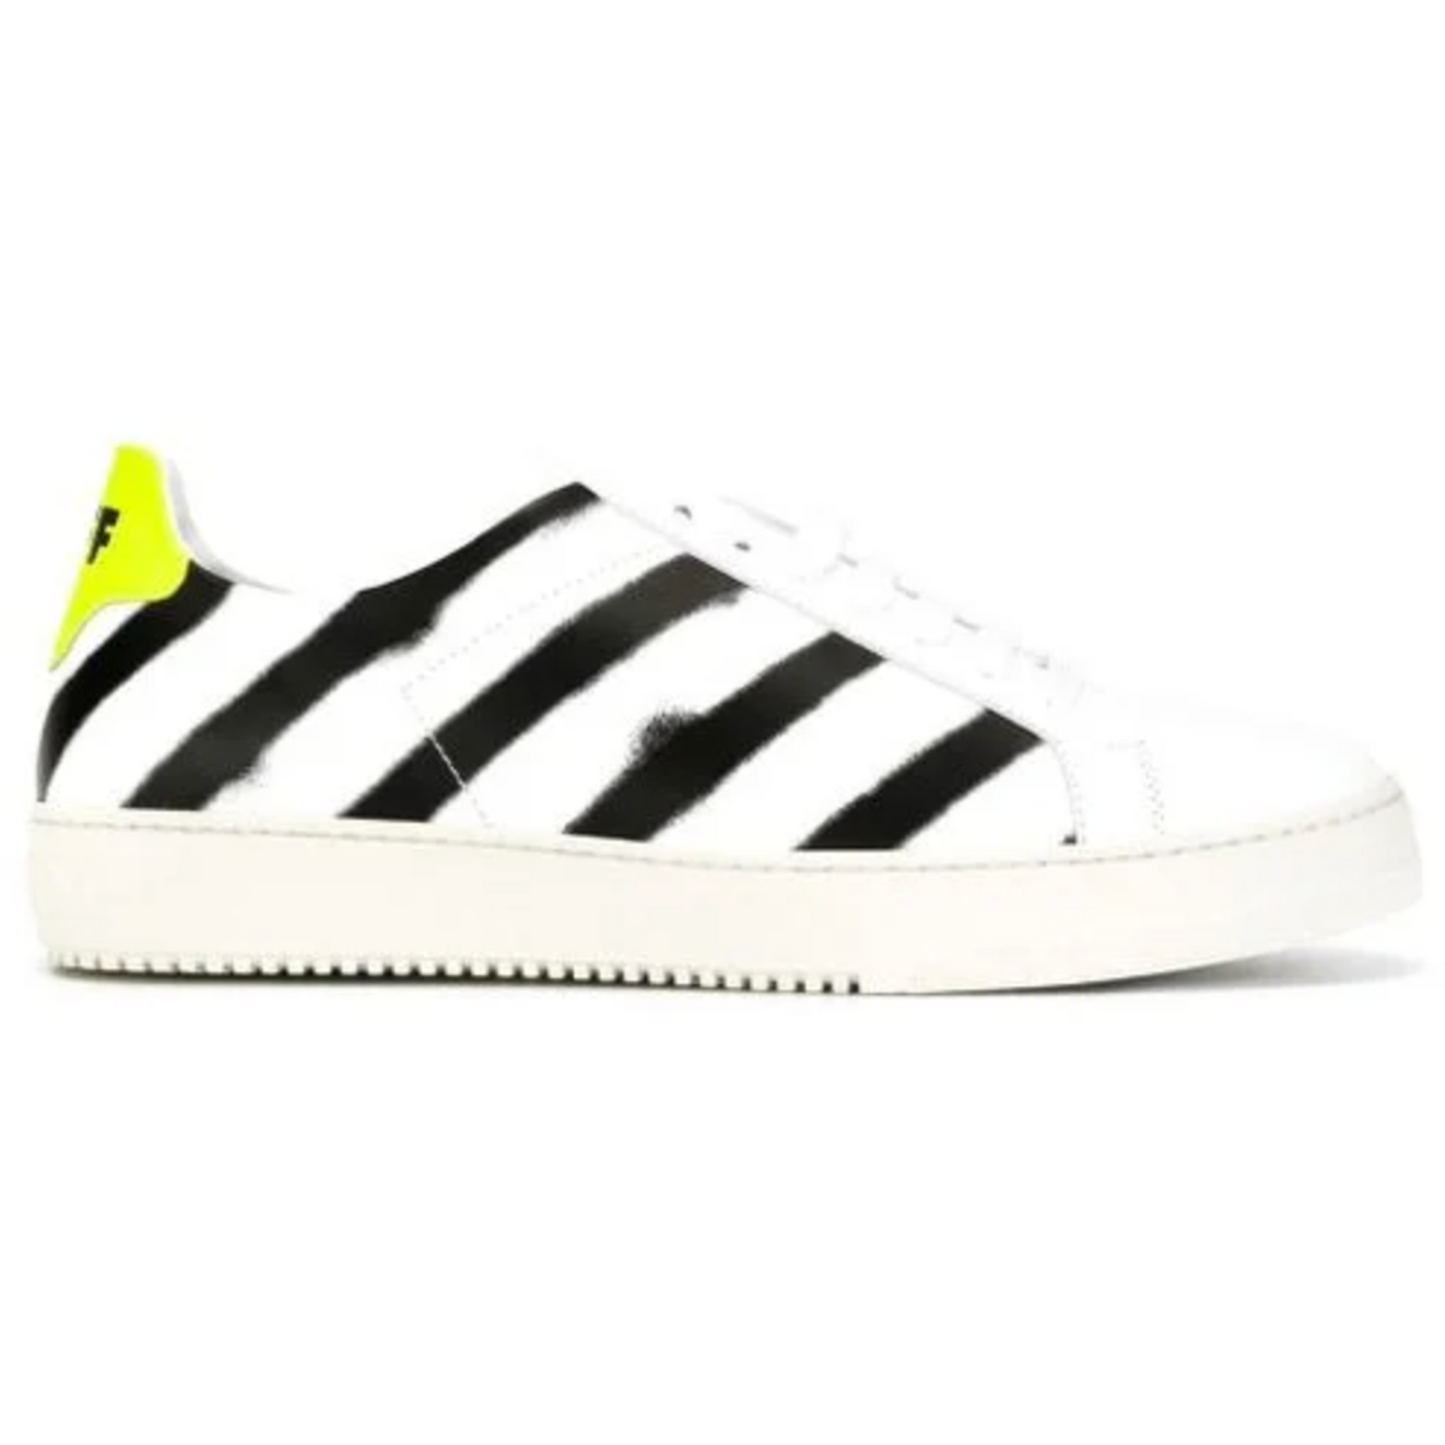 Off-White Spray Paint Splash White Sneakers white-leather-sneakers product-9094-106941370-3b9db269-e2a.png